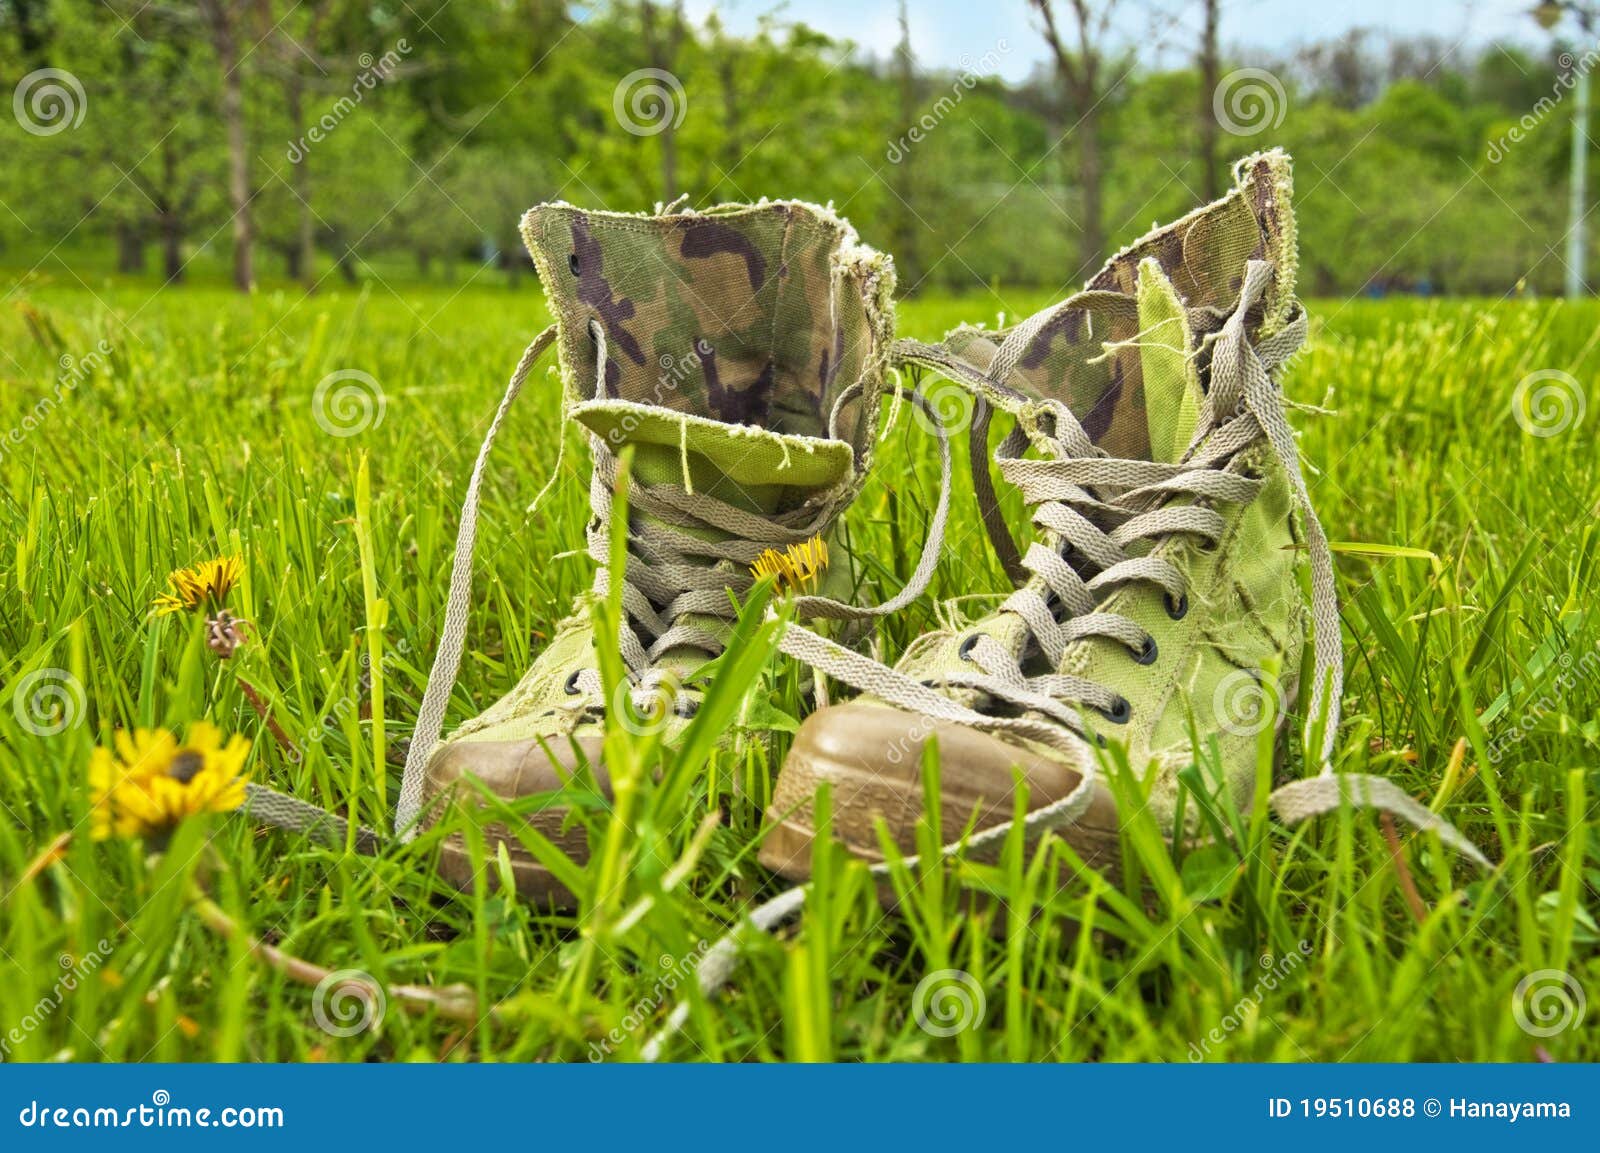 Camouflage boots stock photo. Image of urban, sole, color - 19510688